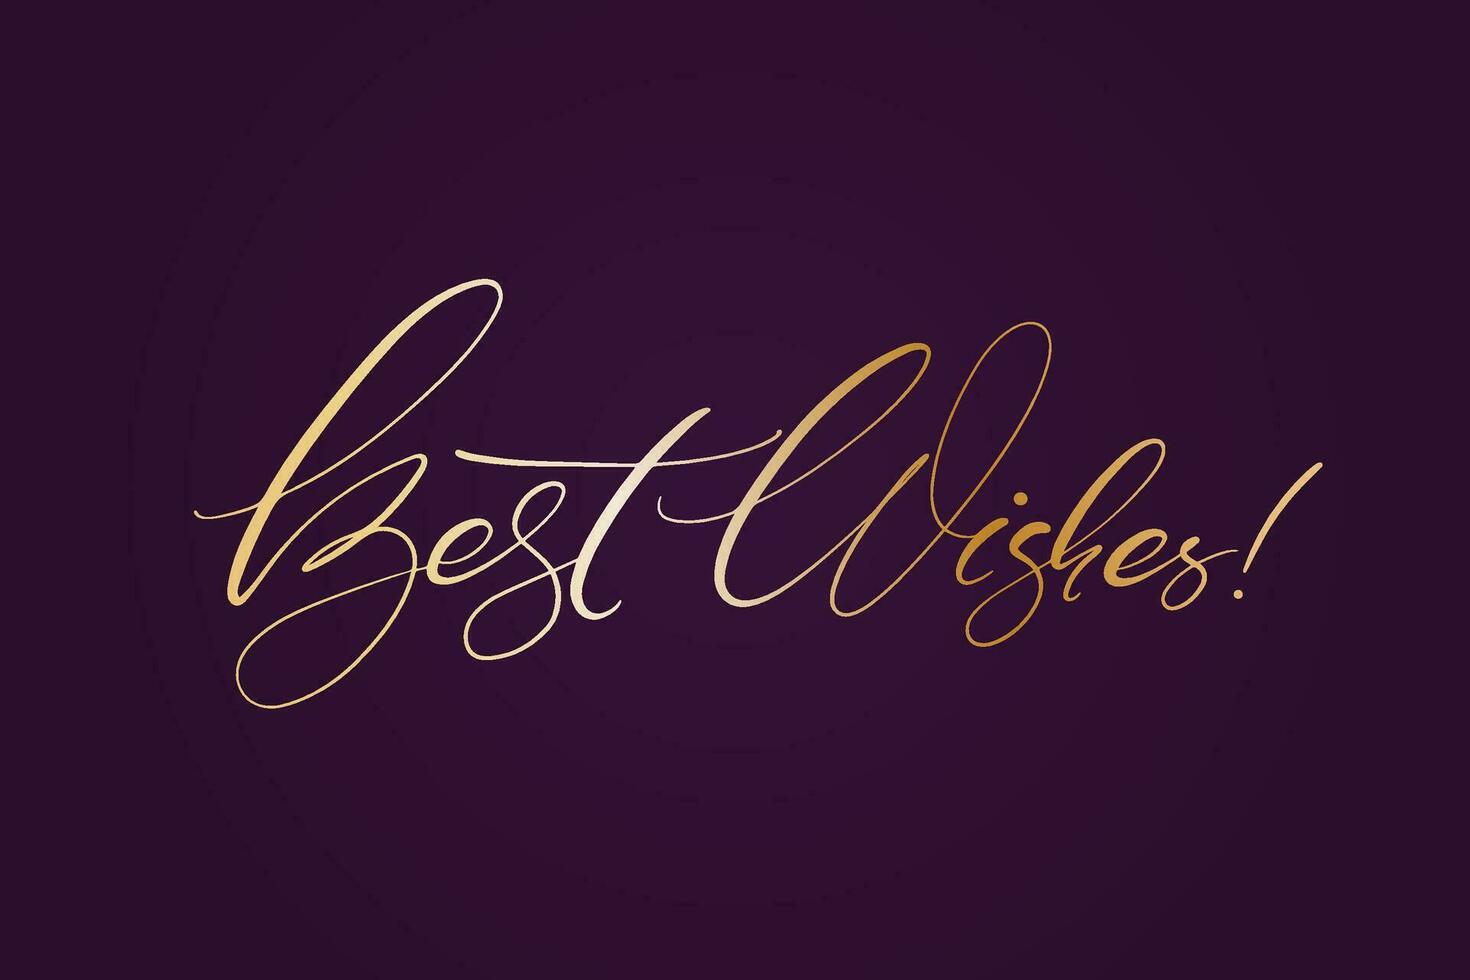 BEST WISHES hand lettering, vector illustration. Hand drawn lettering card background. Modern handmade calligraphy. Hand drawn lettering element for your design.